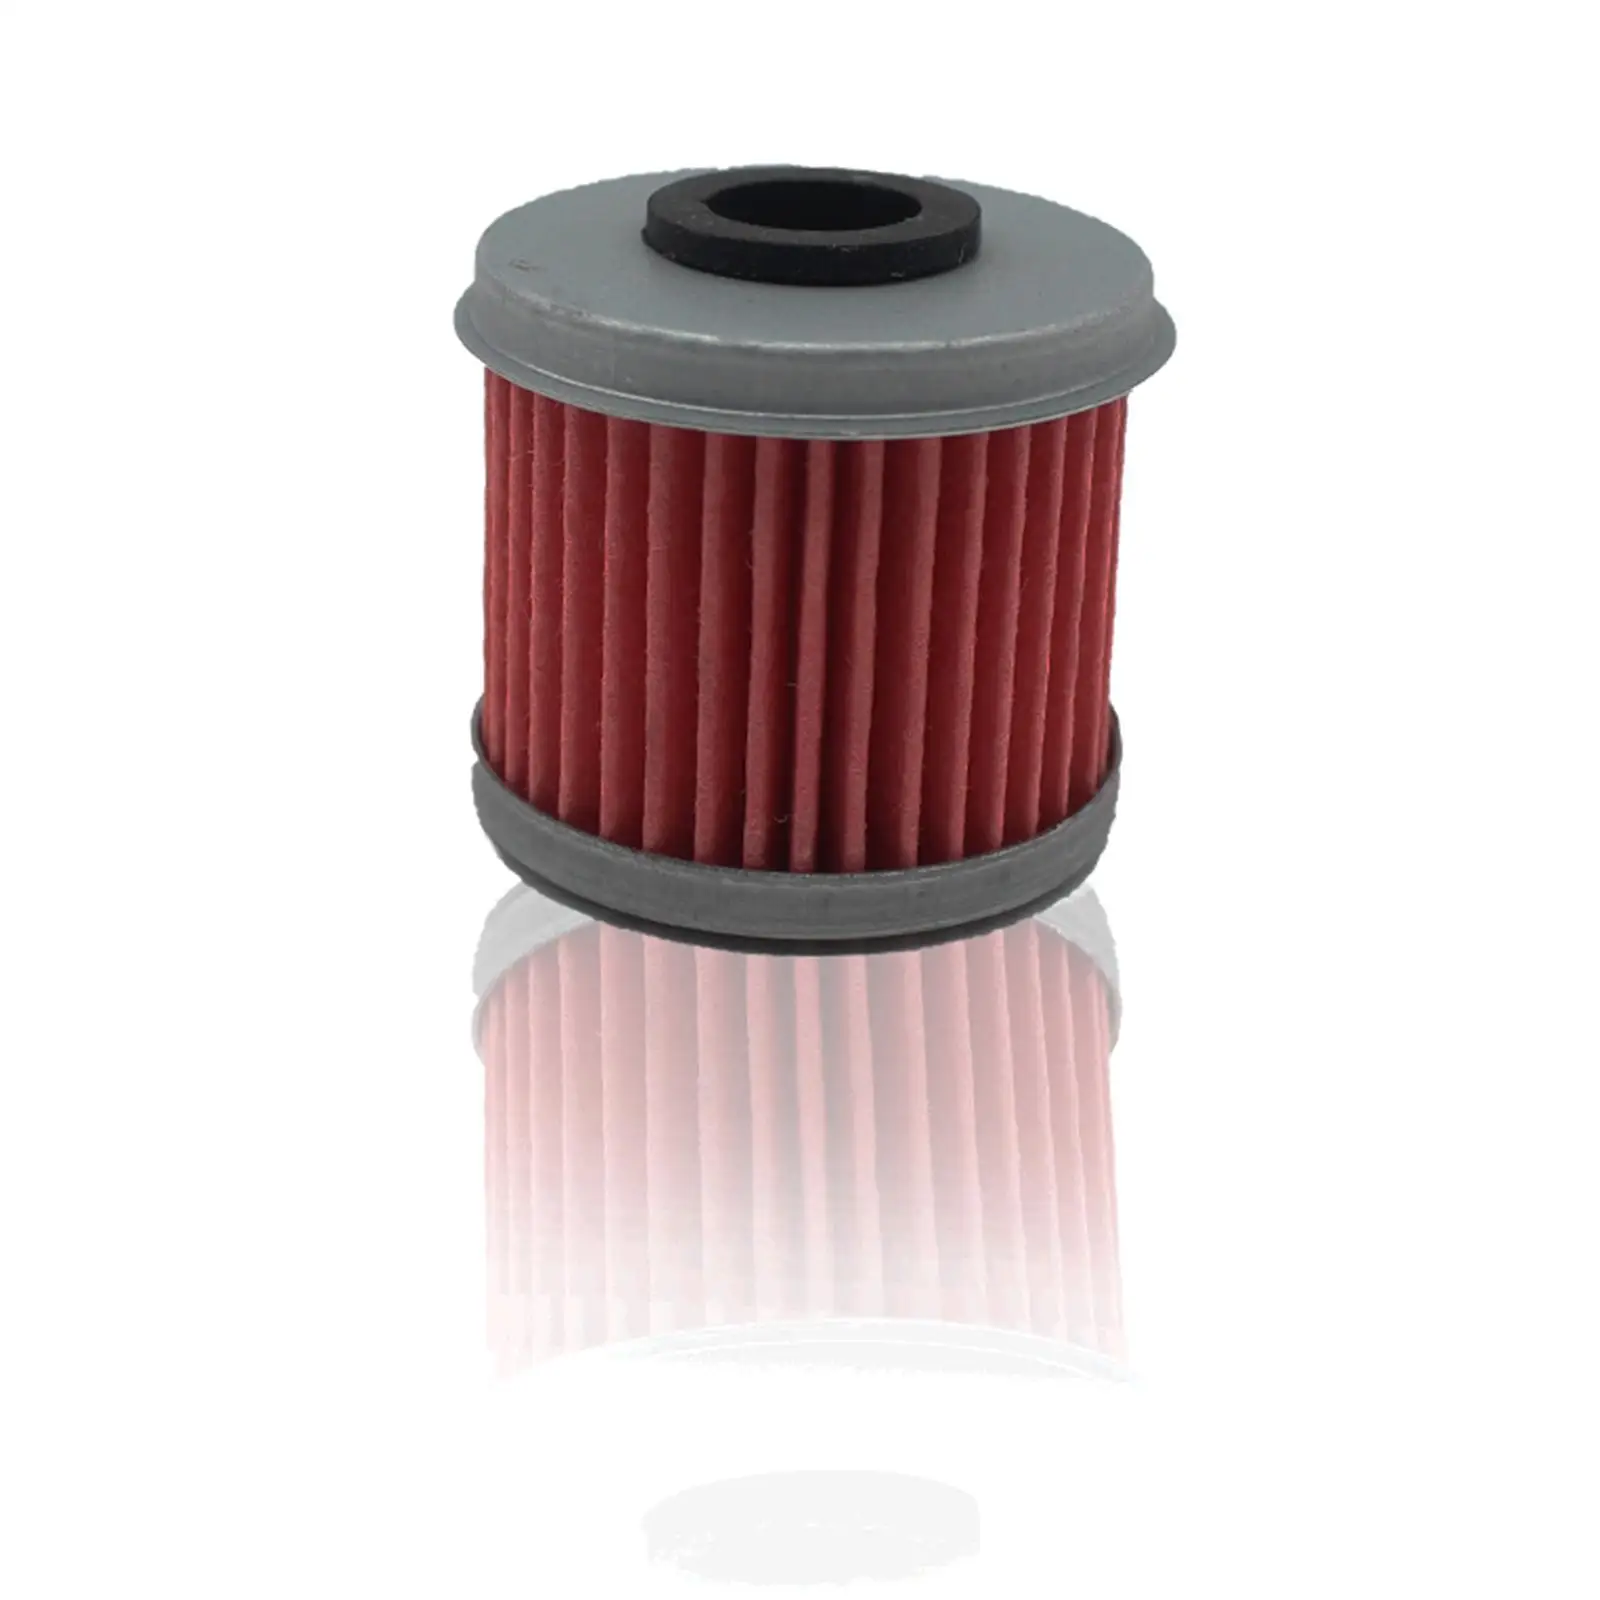 Oil Filter Fit for Honda NC700 S Dct Spare Parts Accessories Easy to Install 15412-Mgs-D21